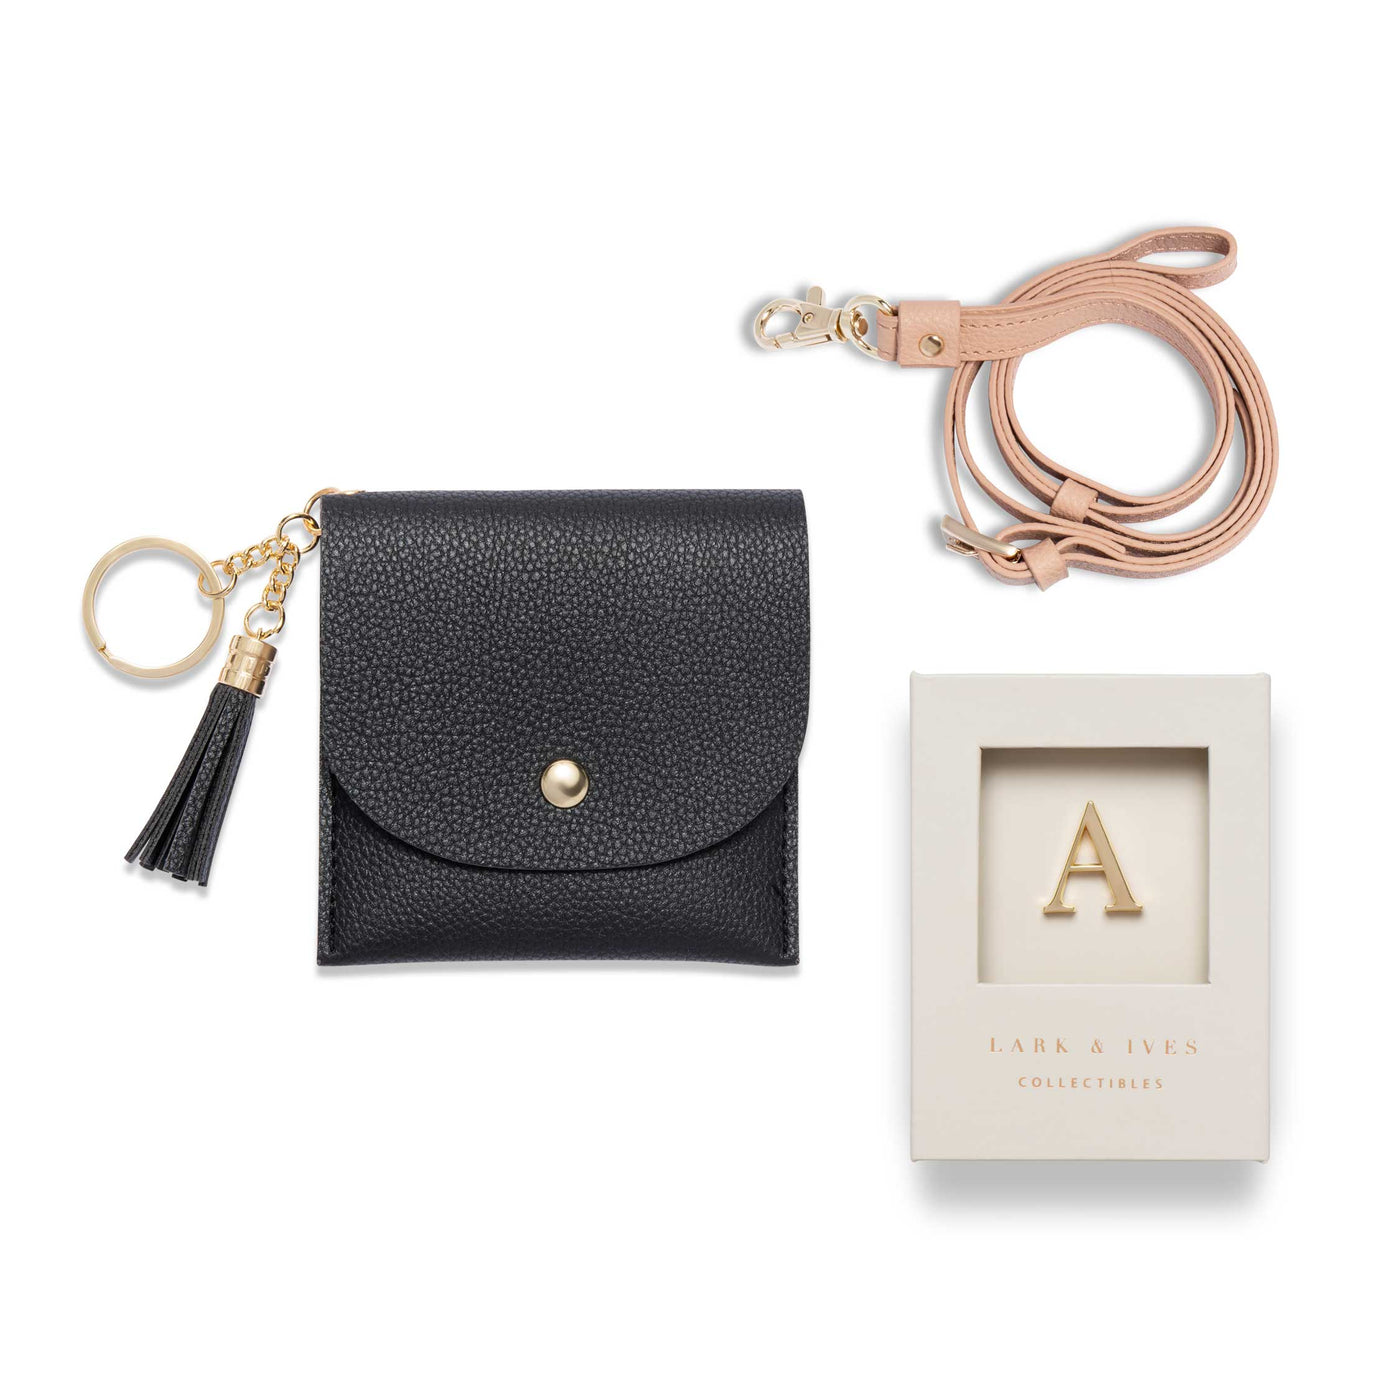 Lark and Ives / Vegan Leather Accessories / Small Accessories / Wallet / Mini Wallet / Card Case / Card Holder / Button snap closure / Flap Wallet / Card Purse with Gold Button and Keyring / Lanyard / Card Purse with Lanyard and Monogram Pin / Black